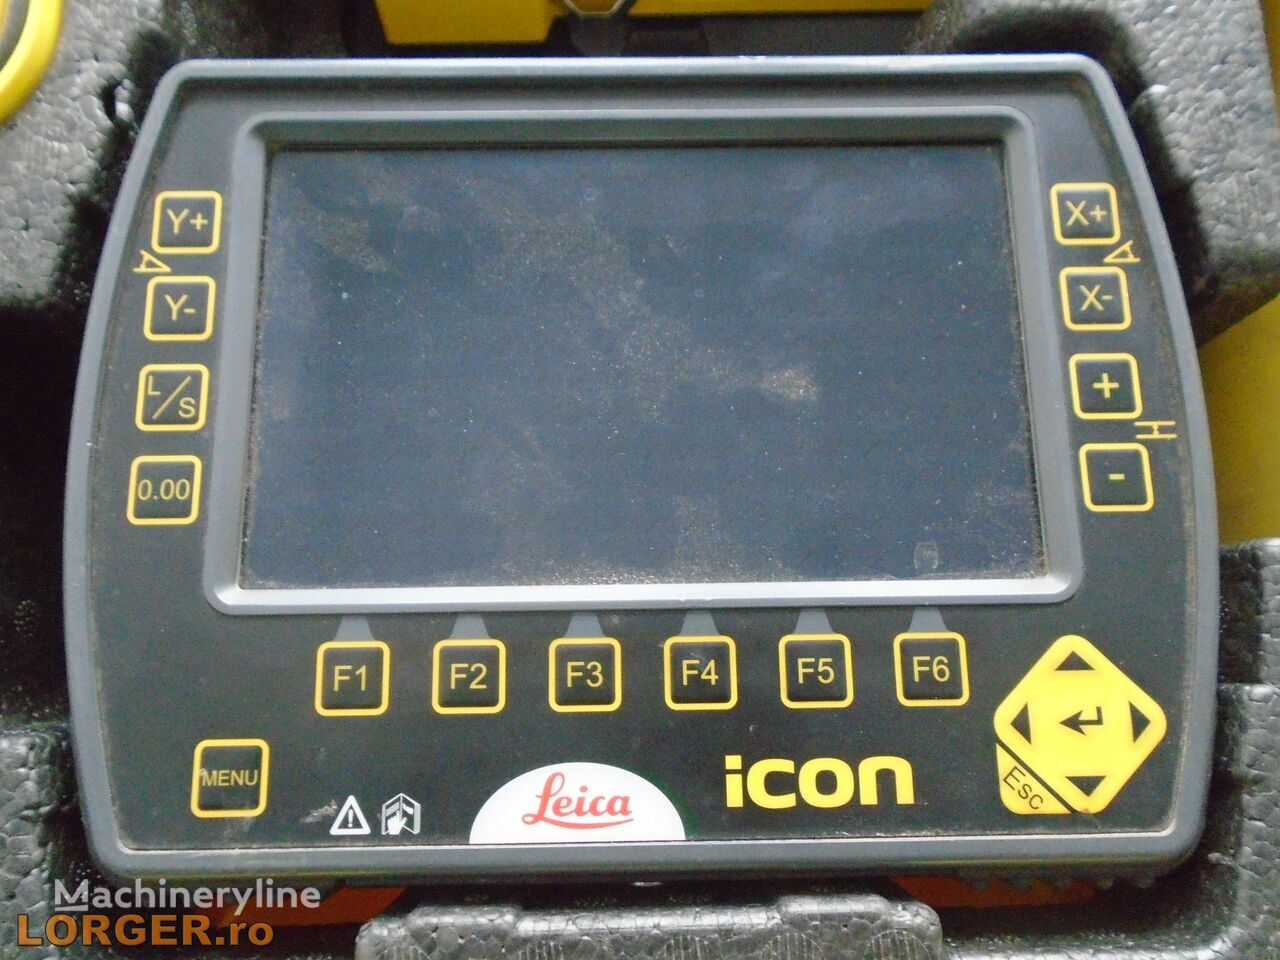 Leica - Navigation system for Excavator: picture 2